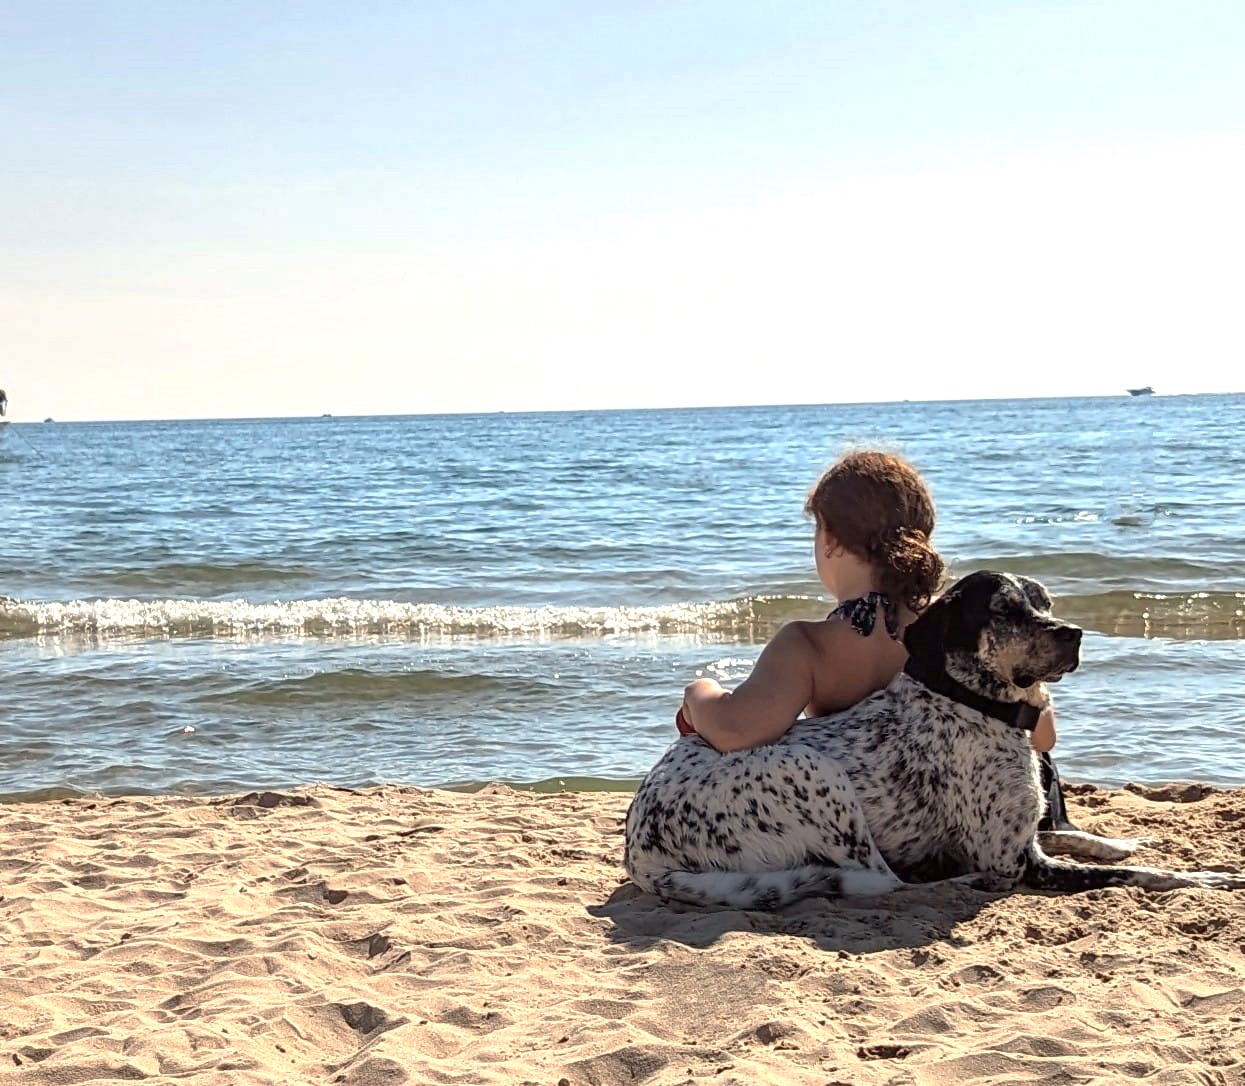 Discover Dog-Friendly Beaches, Parks, and Restaurants in West Michigan This Summer